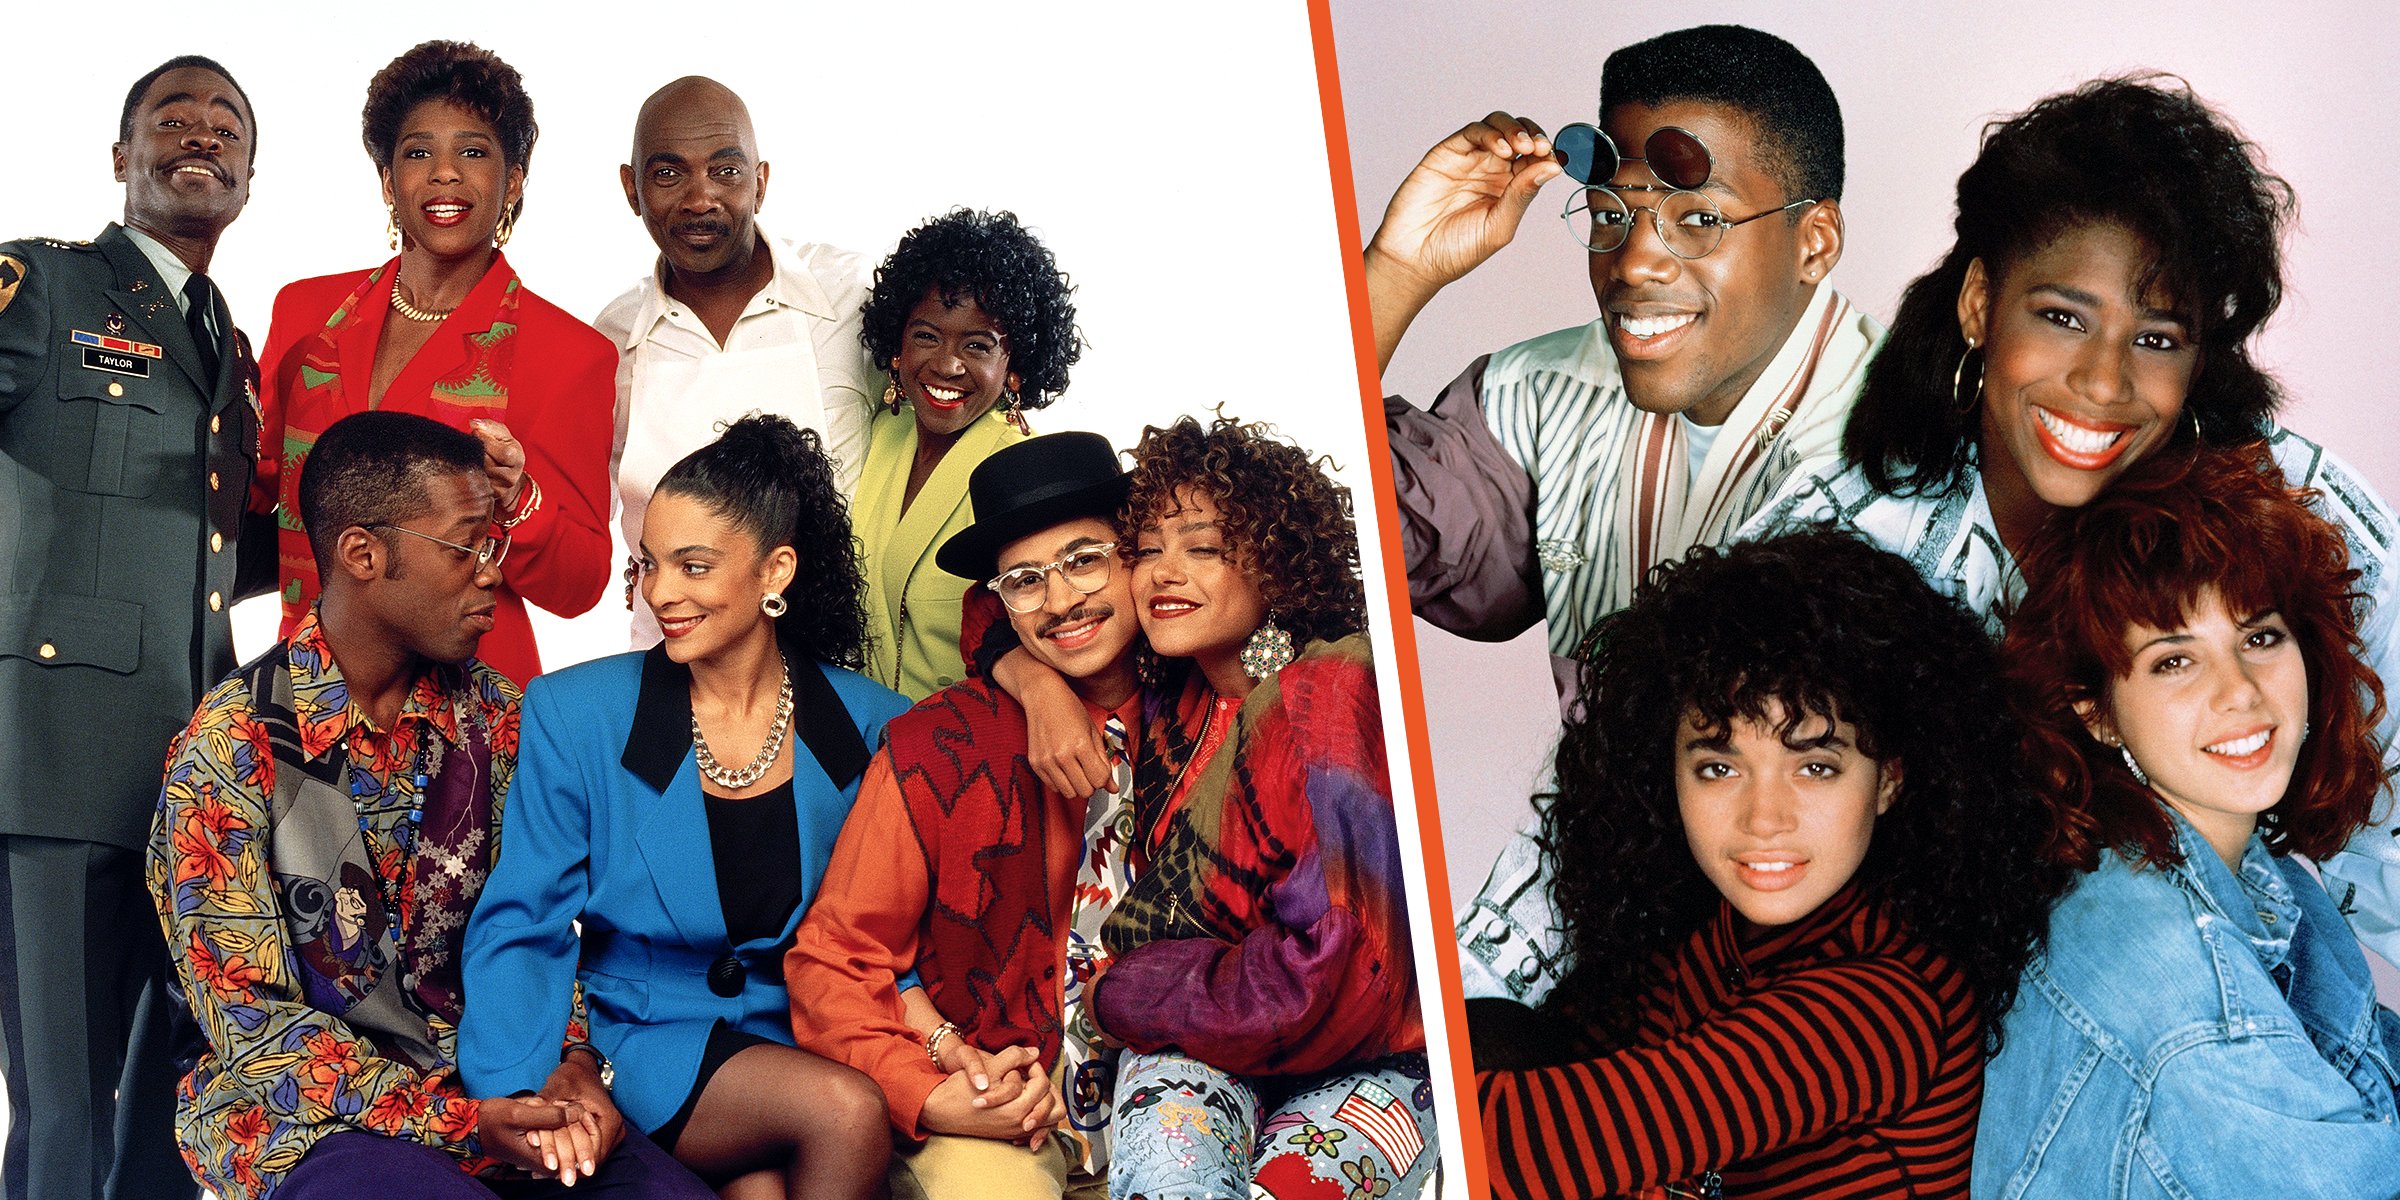 The Cast of “A Different World” Pose for Pictures | Source: Getty Images